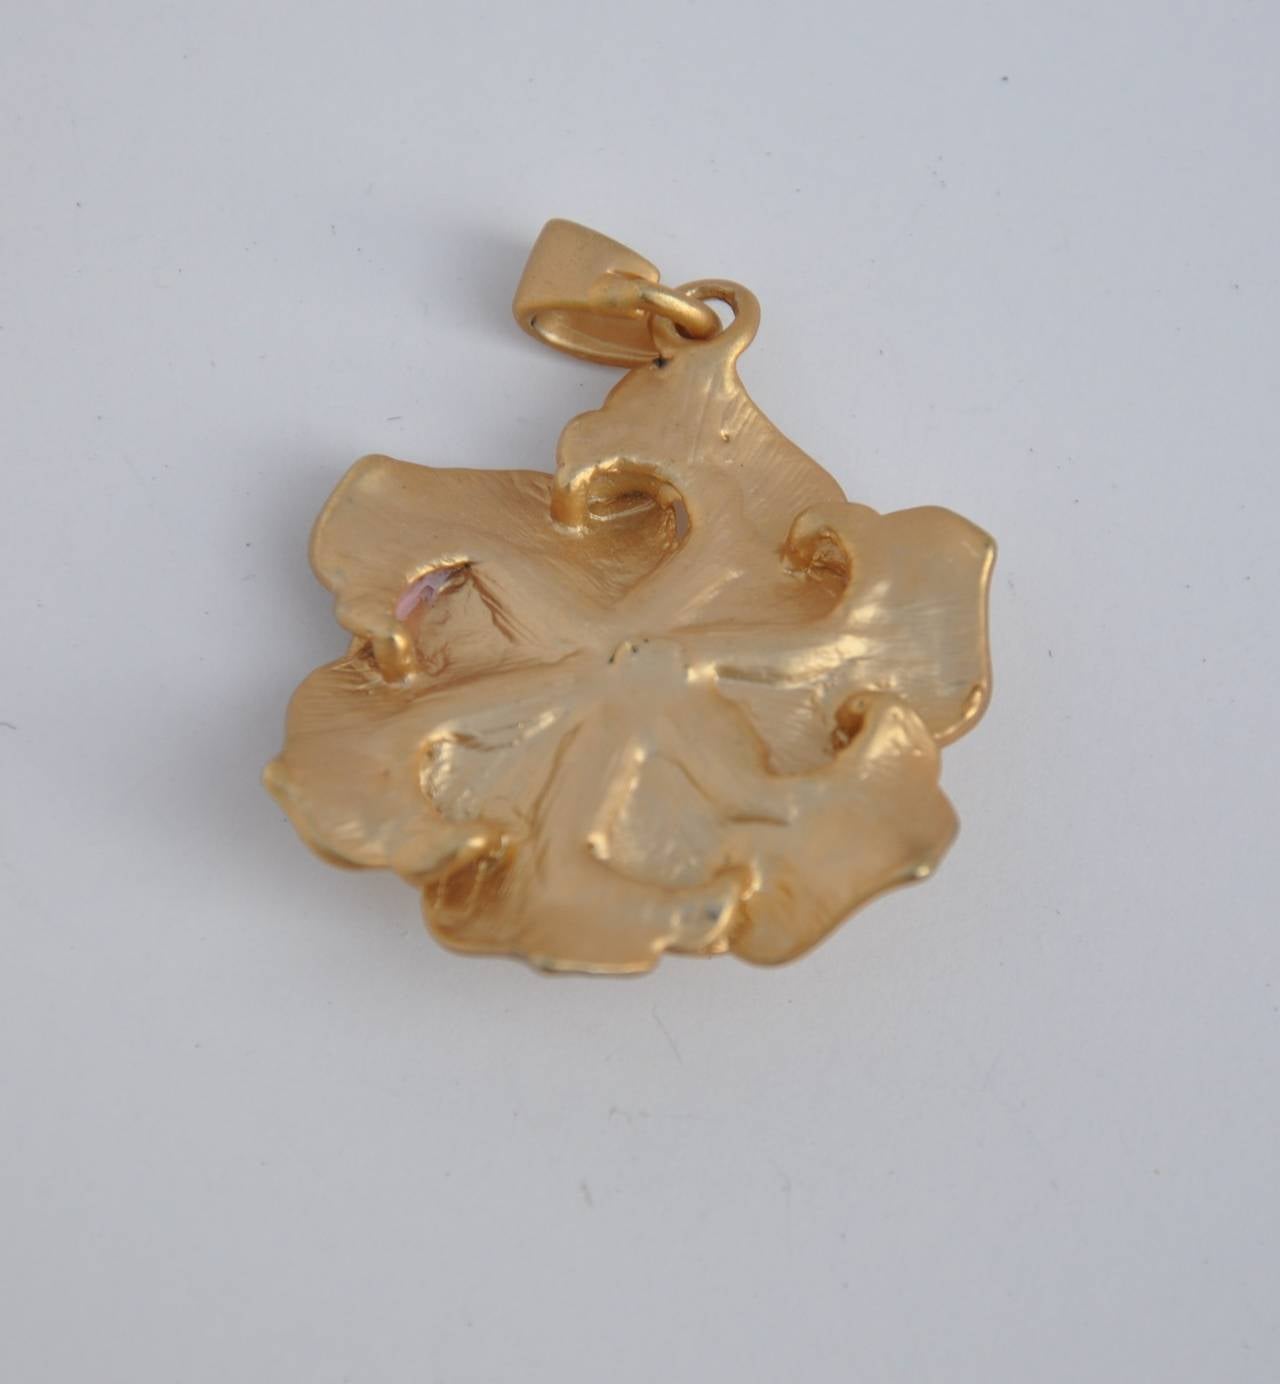 Gilded gold vermeil finished floral pendant is accented with rhinestones and measures 2" in height, 3/8" in length and 3/8" in depth.